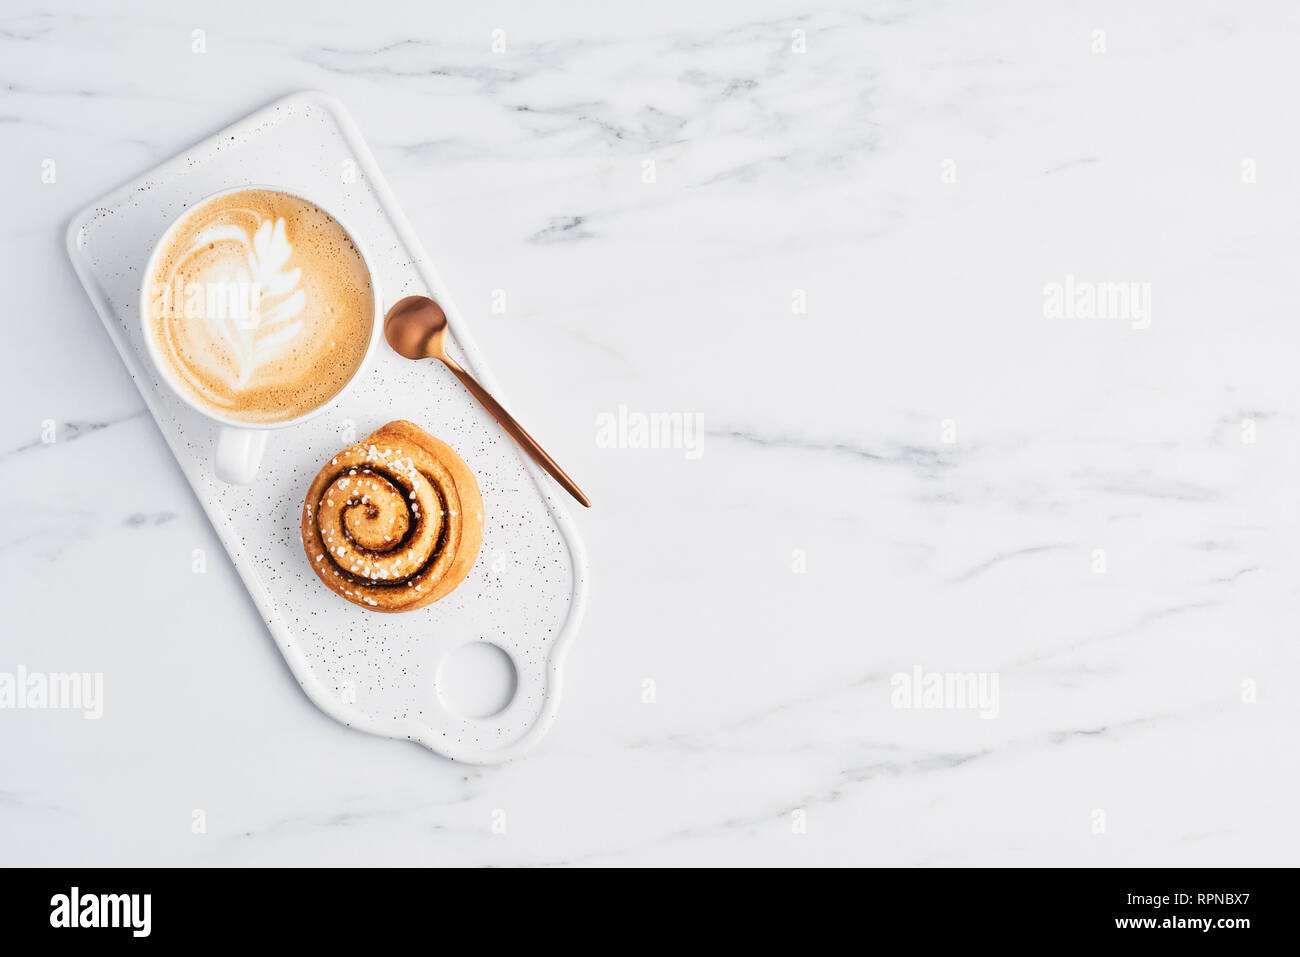 Freshly baked cinnamon bun with spices and cocoa filling and coffee or cappuccino with latte art on white serving plate over white marble background.  Stock Photo